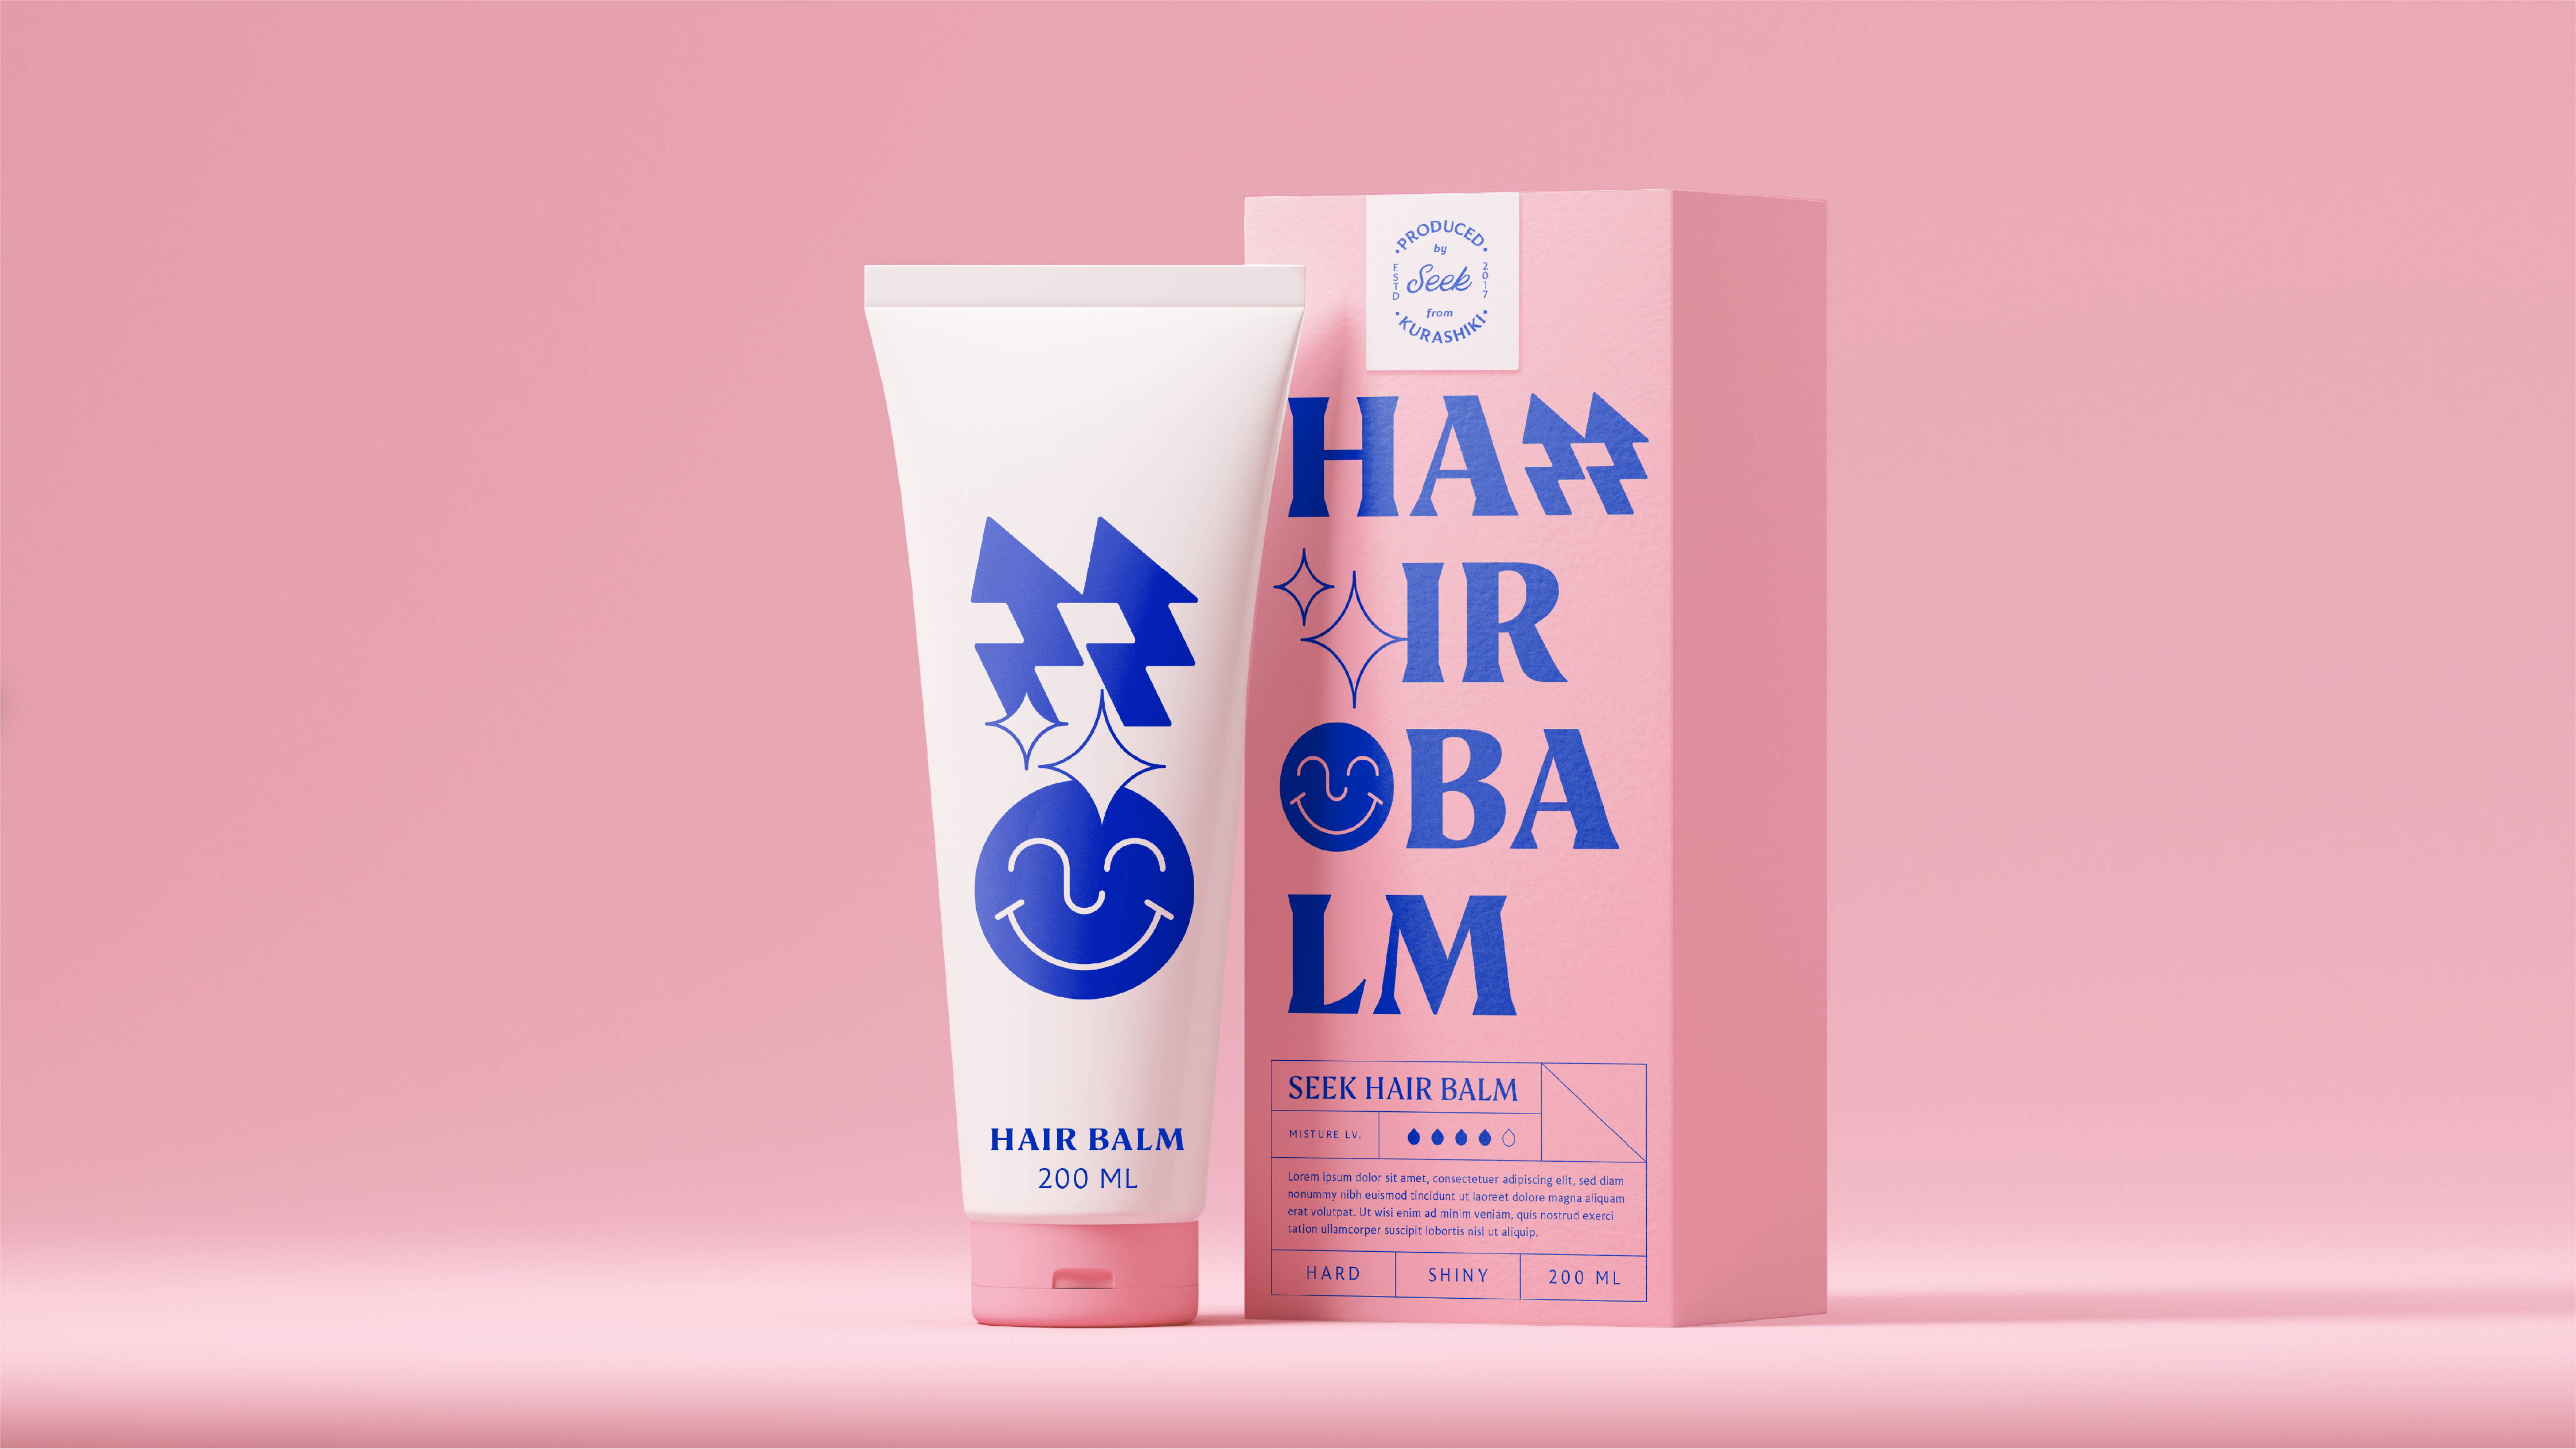 Bold Colors, Type, and Icons For Seek Hair Salon in Japan | Search by Muzli